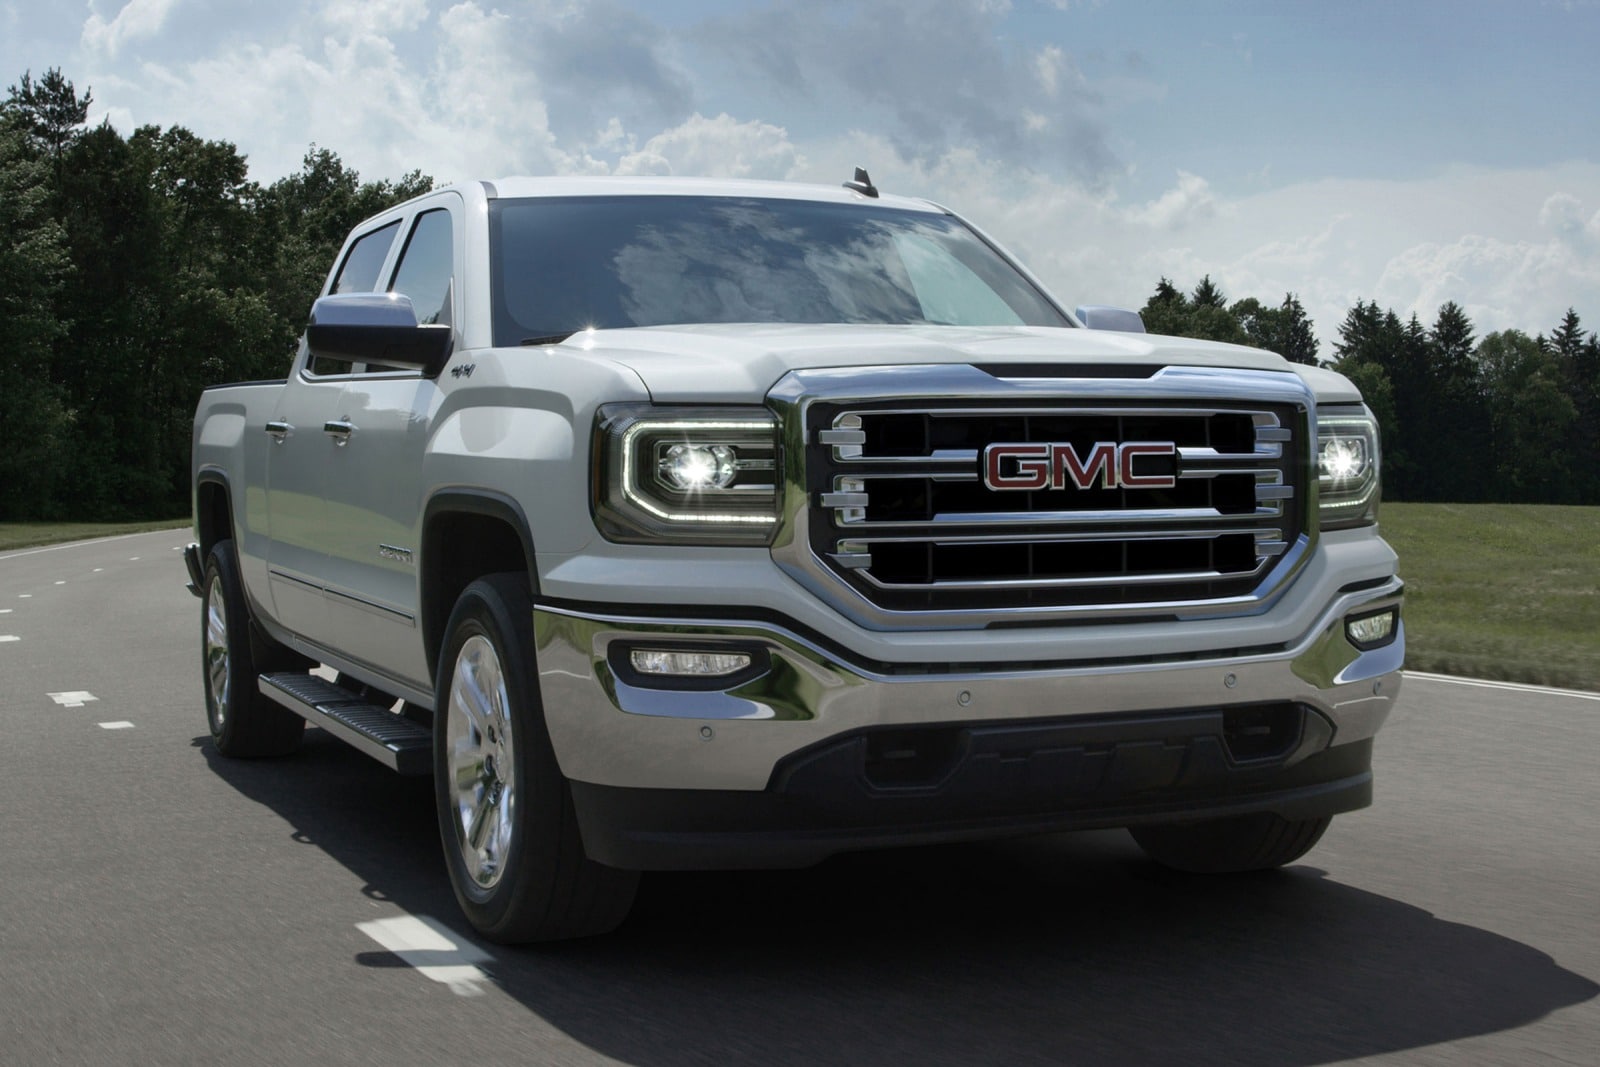 Used 2018 GMC Sierra 1500 Double Cab Review | Edmunds